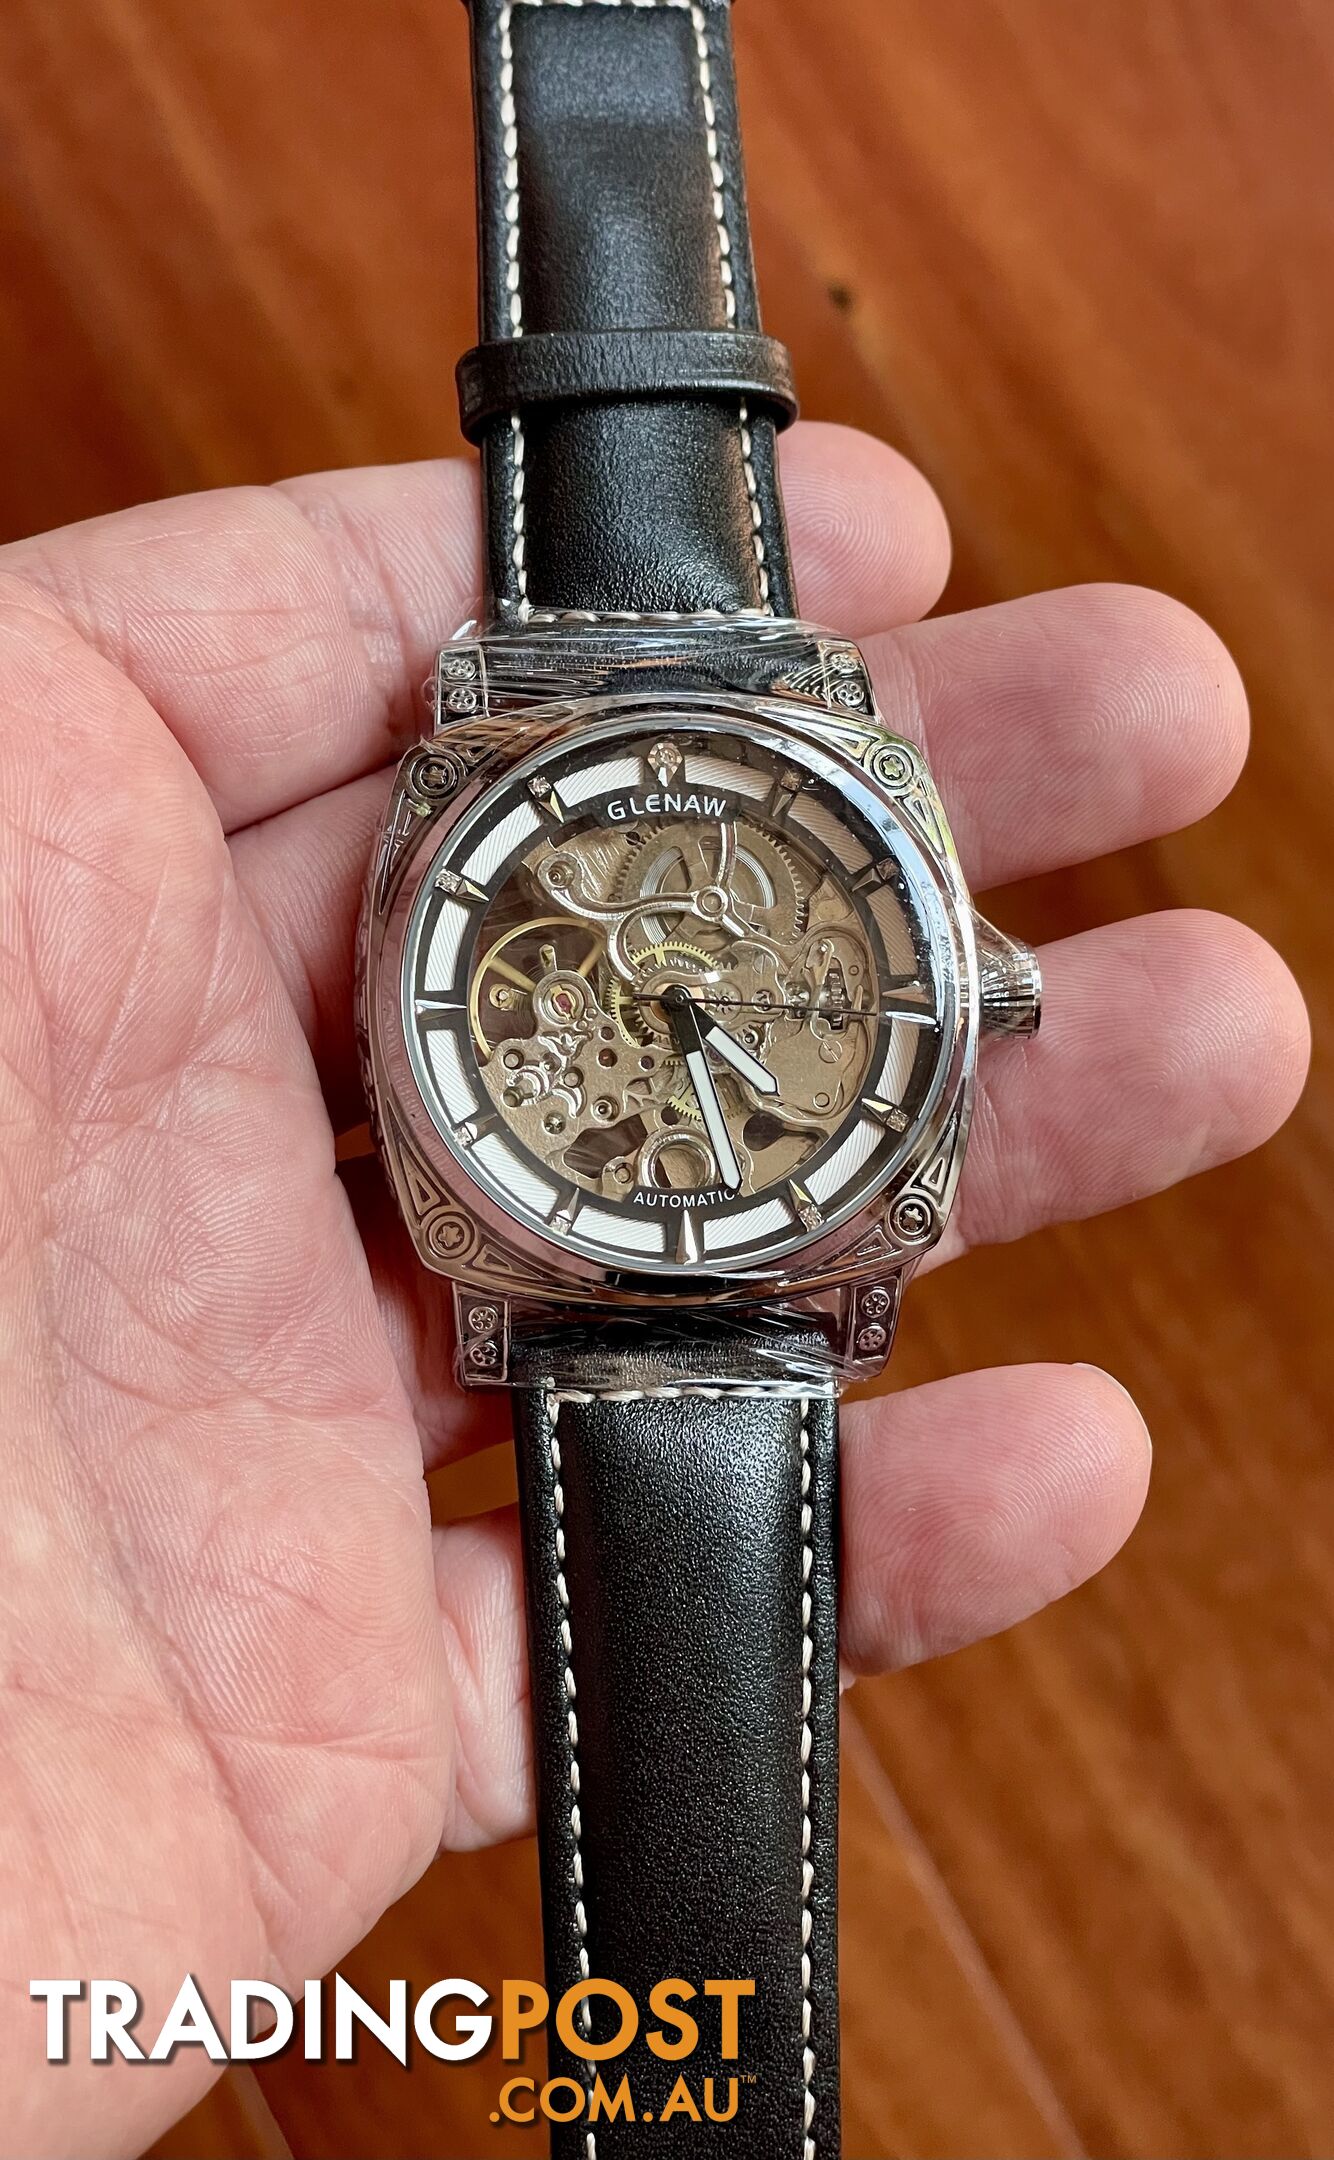 Brand New Watch for sale - Skeleton Design, Engraved Case, Automatic Mechanical Movement